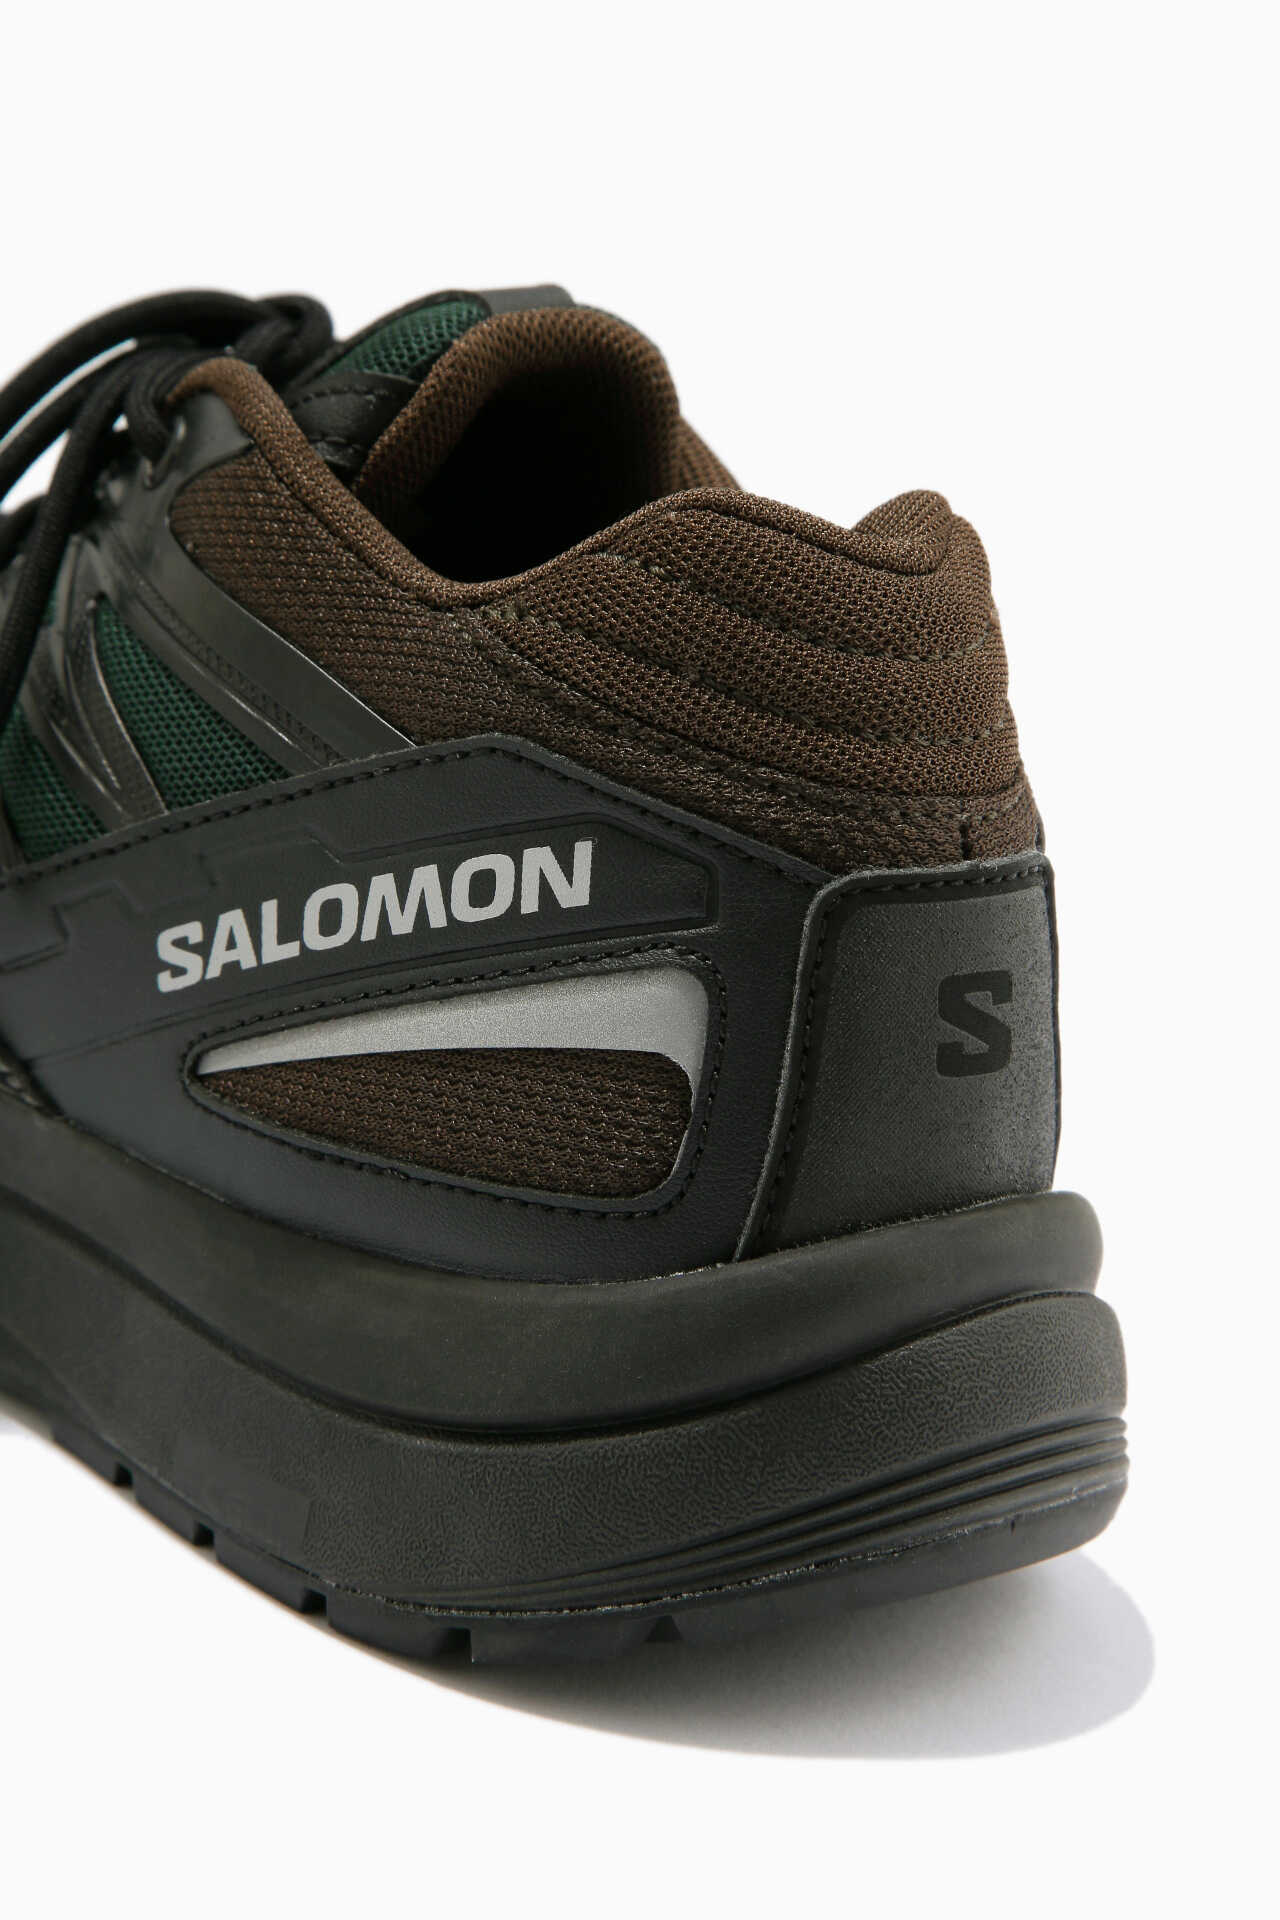 SALOMON ODYSSEY for and wander | footwear | and wander ONLINE STORE